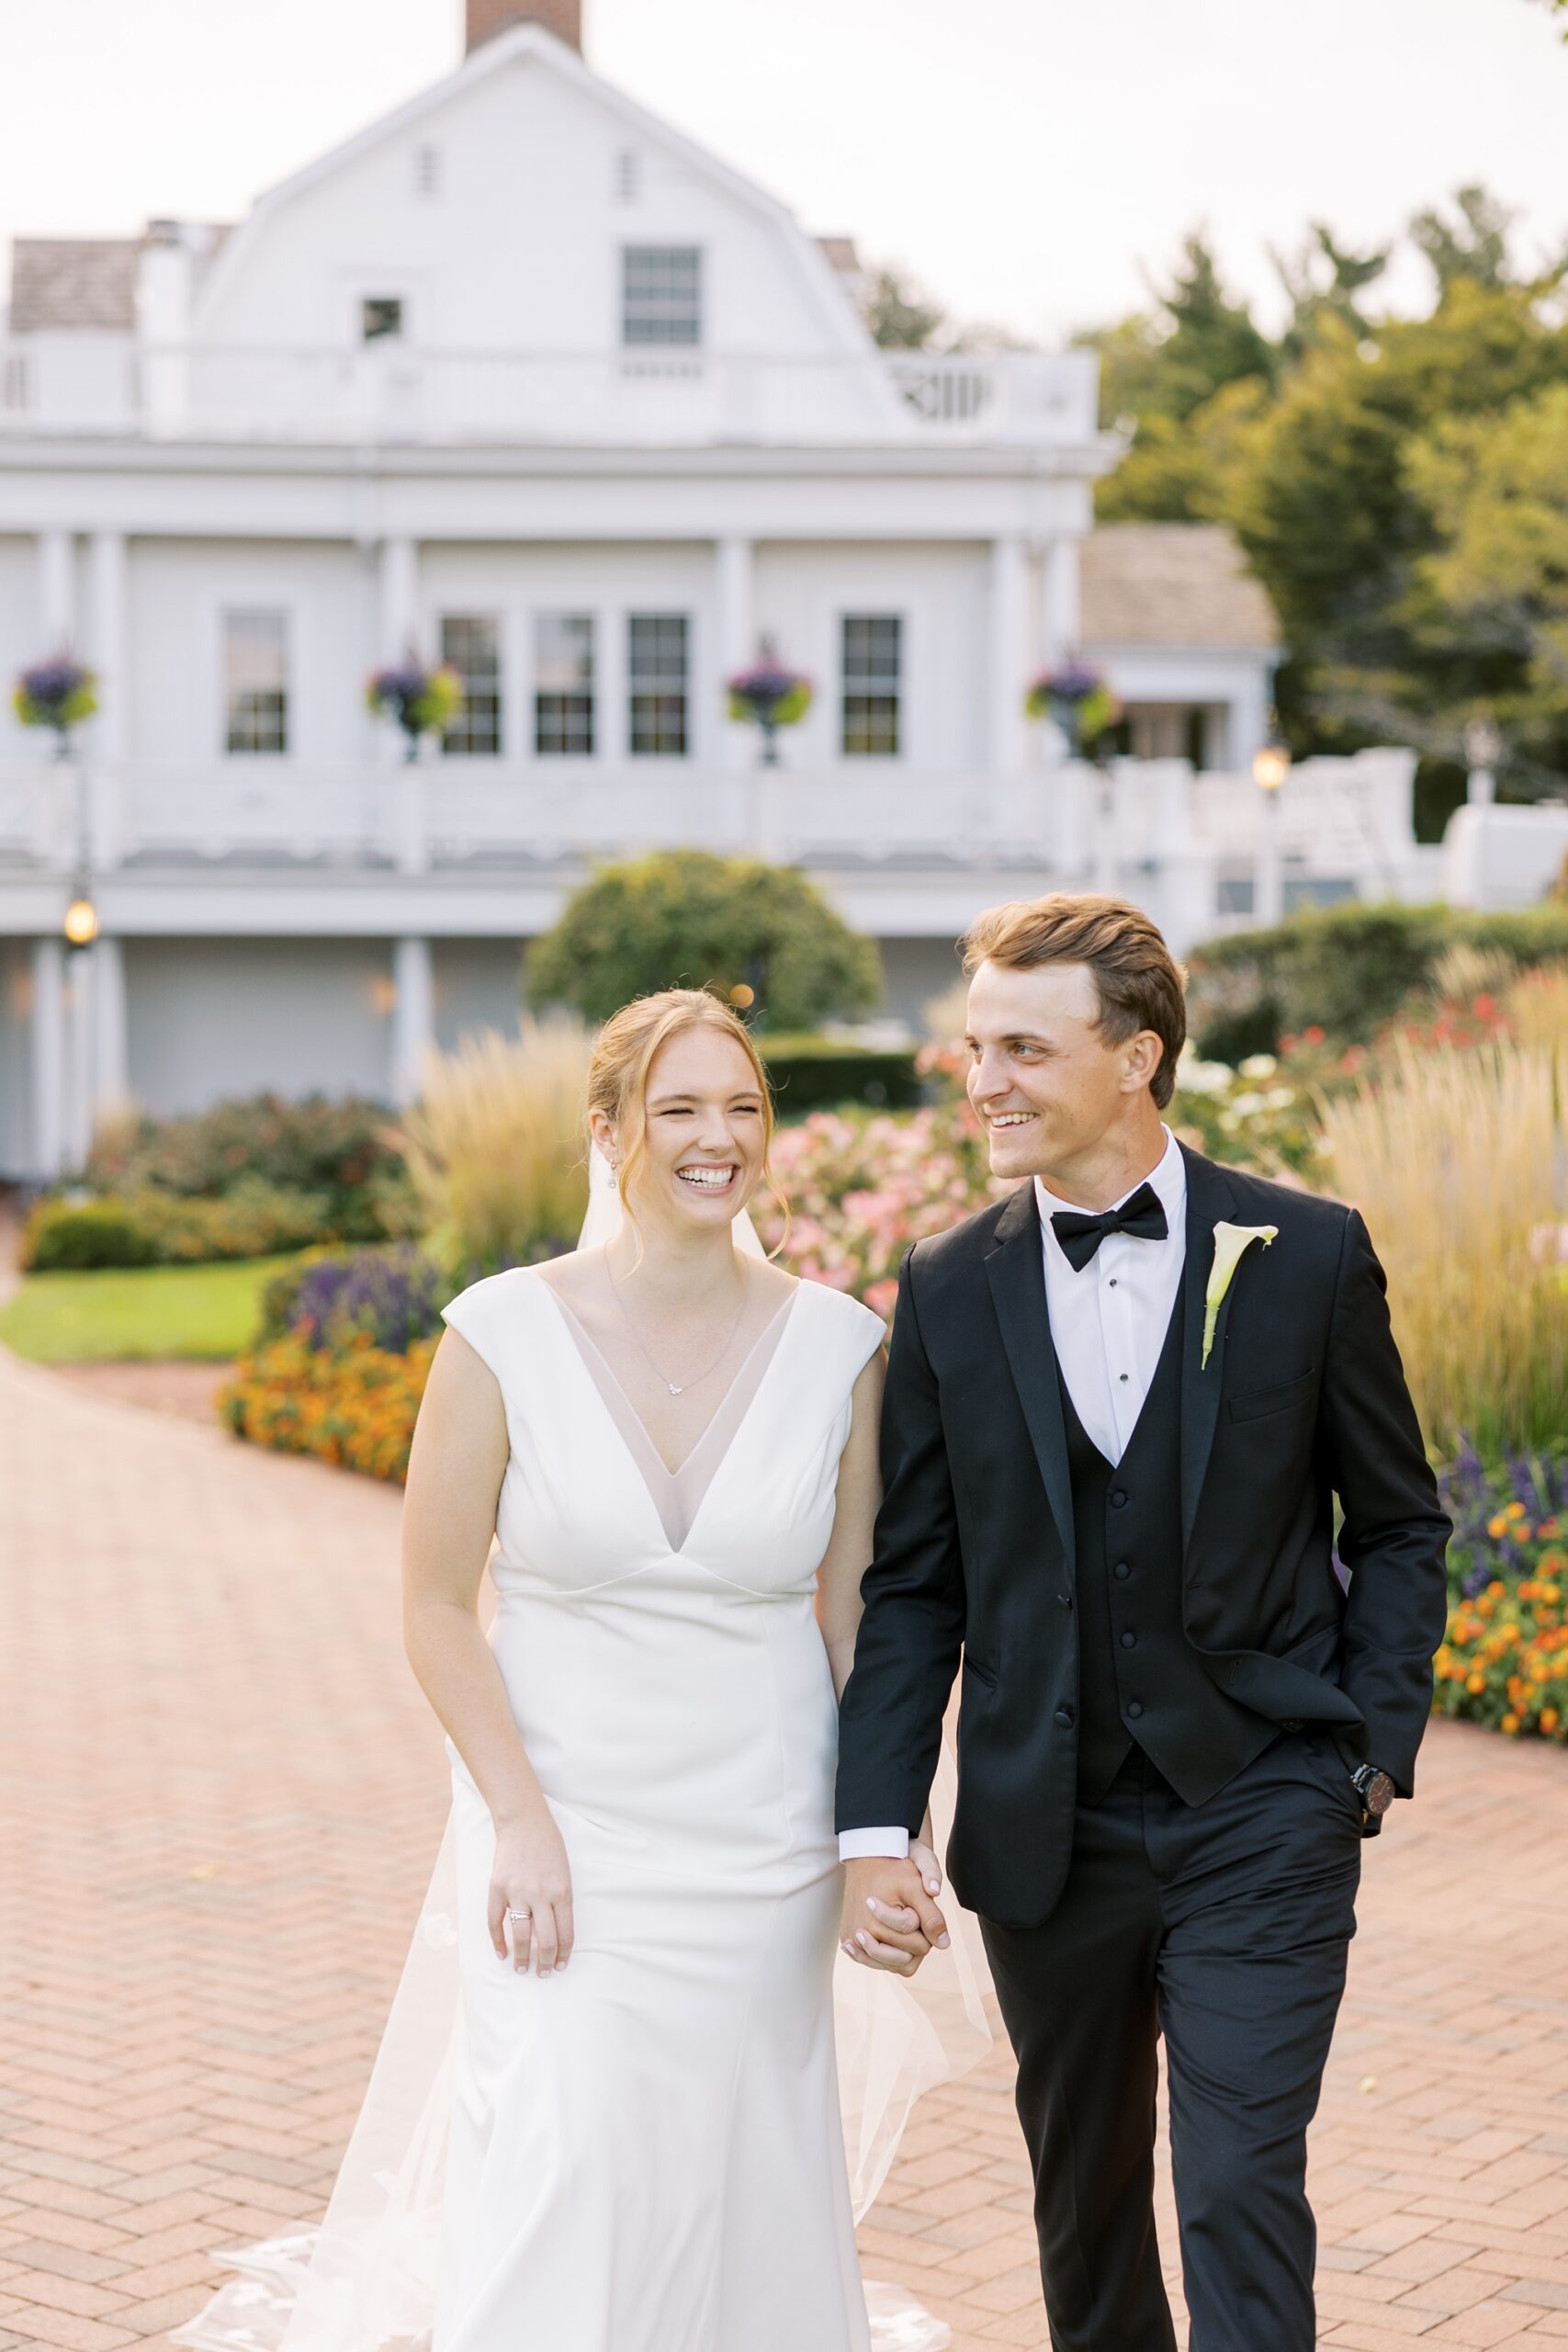 The bride and groom walked to their Westmoreland Country Club wedding reception